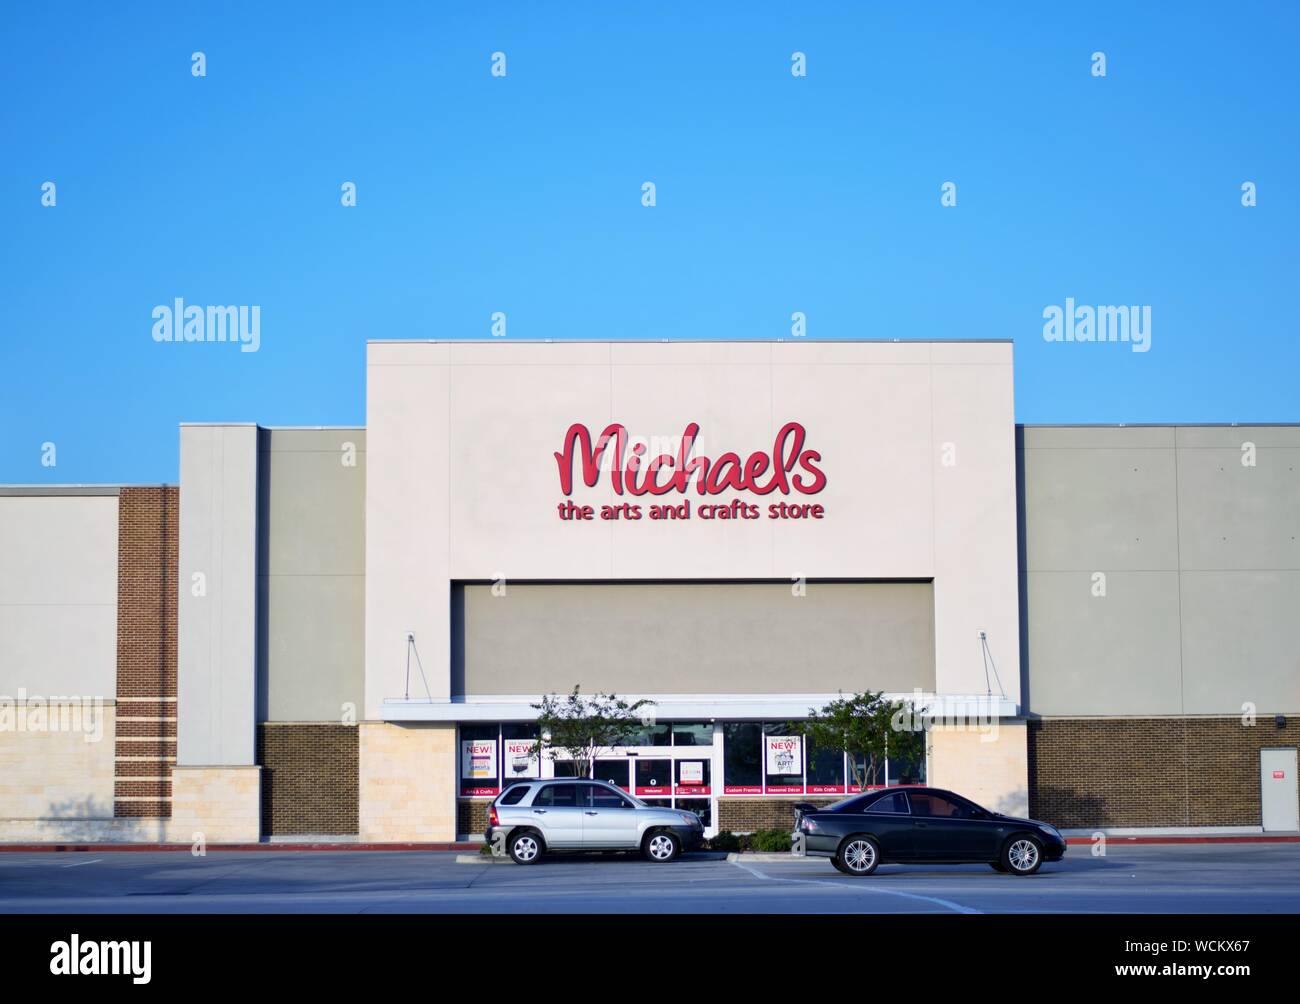 Humble, TX: Michael's arts and crafts storefront with a clear blue sky in the background. Founded in 2013 they are part of Michael's Company Inc. Stock Photo